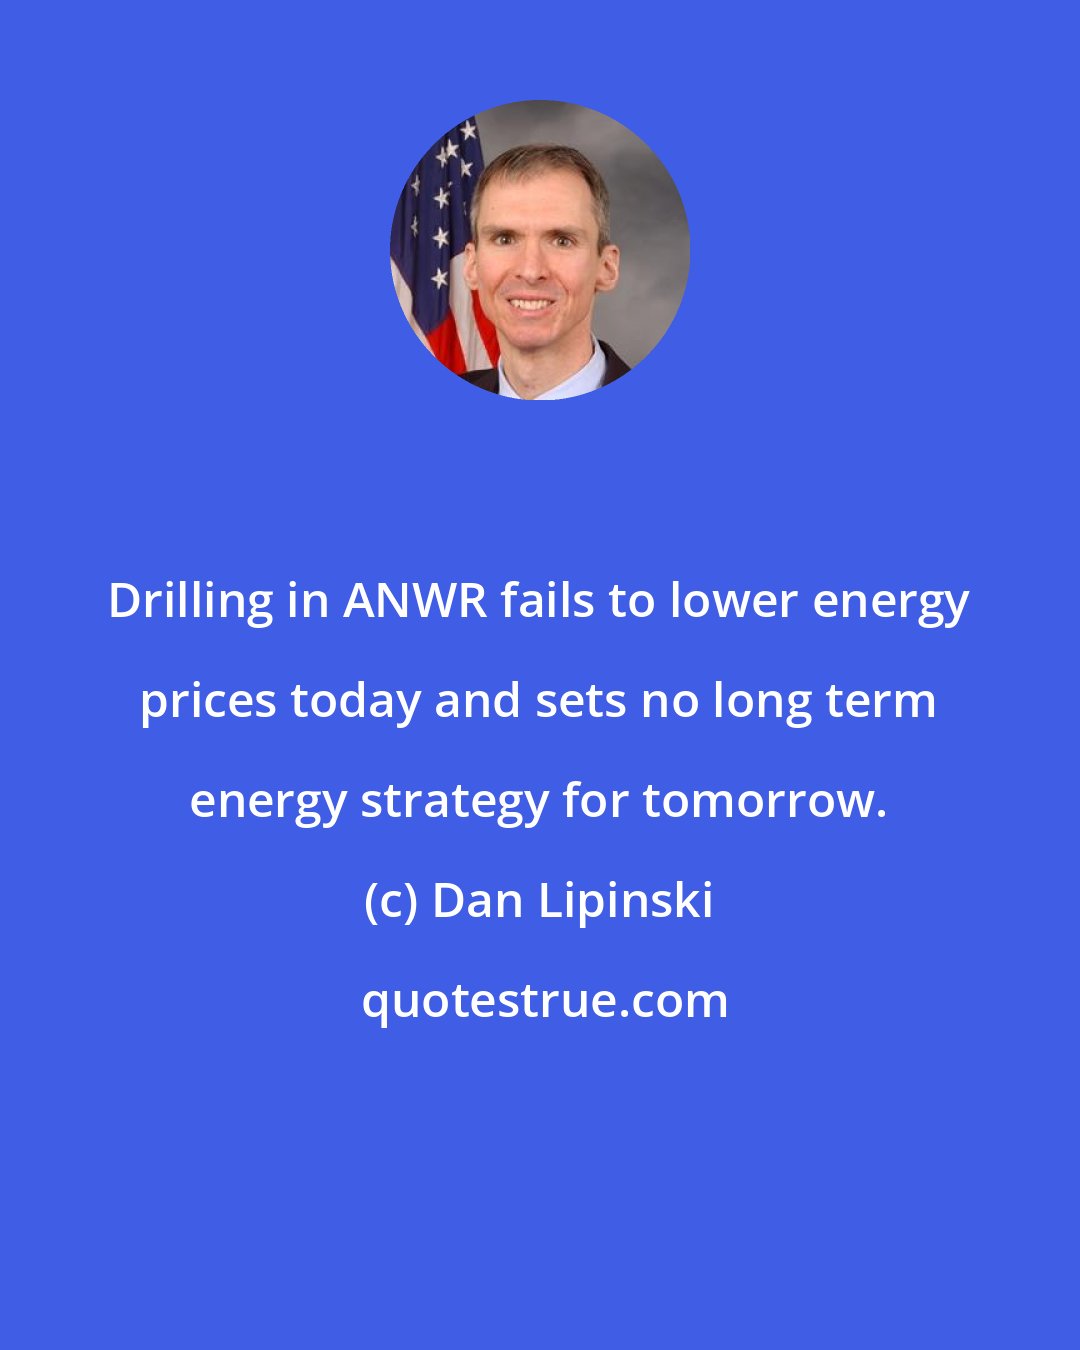 Dan Lipinski: Drilling in ANWR fails to lower energy prices today and sets no long term energy strategy for tomorrow.